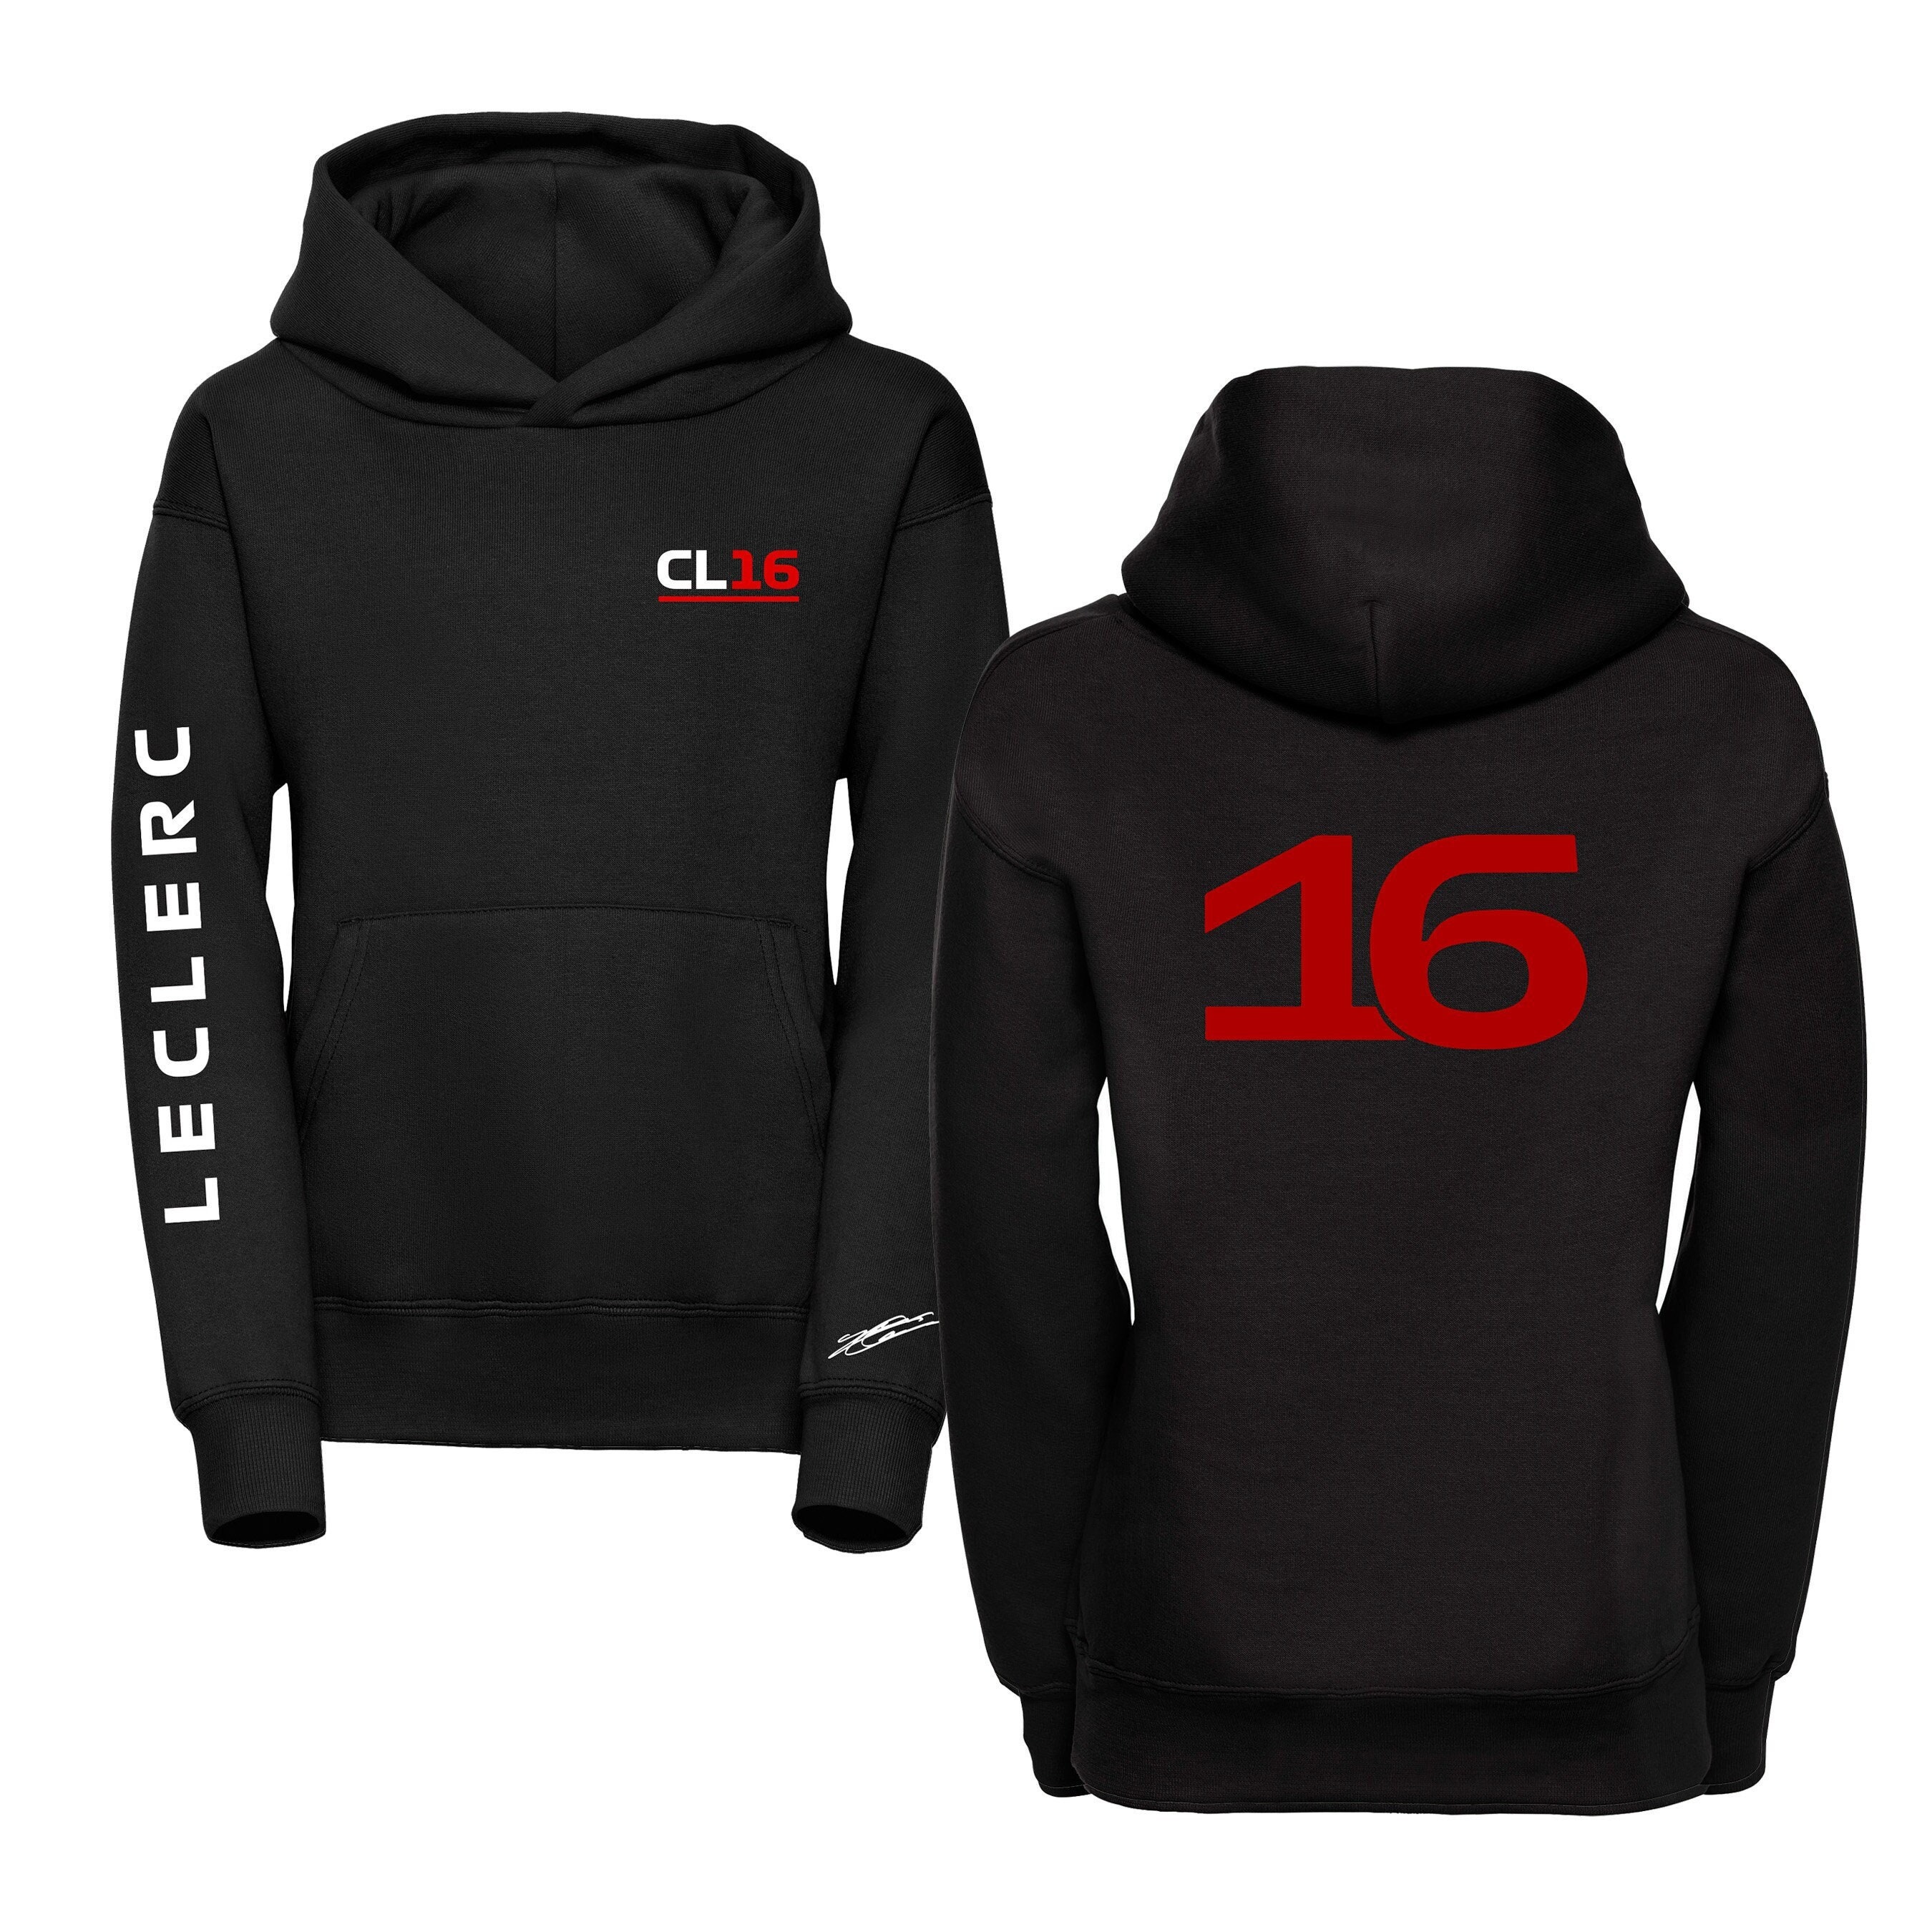 studio 24 Signature Collection Charles Leclerc Hoodie F1 Hooded Sweater Ferrari 16 Racing Hoody Free UK Shipping